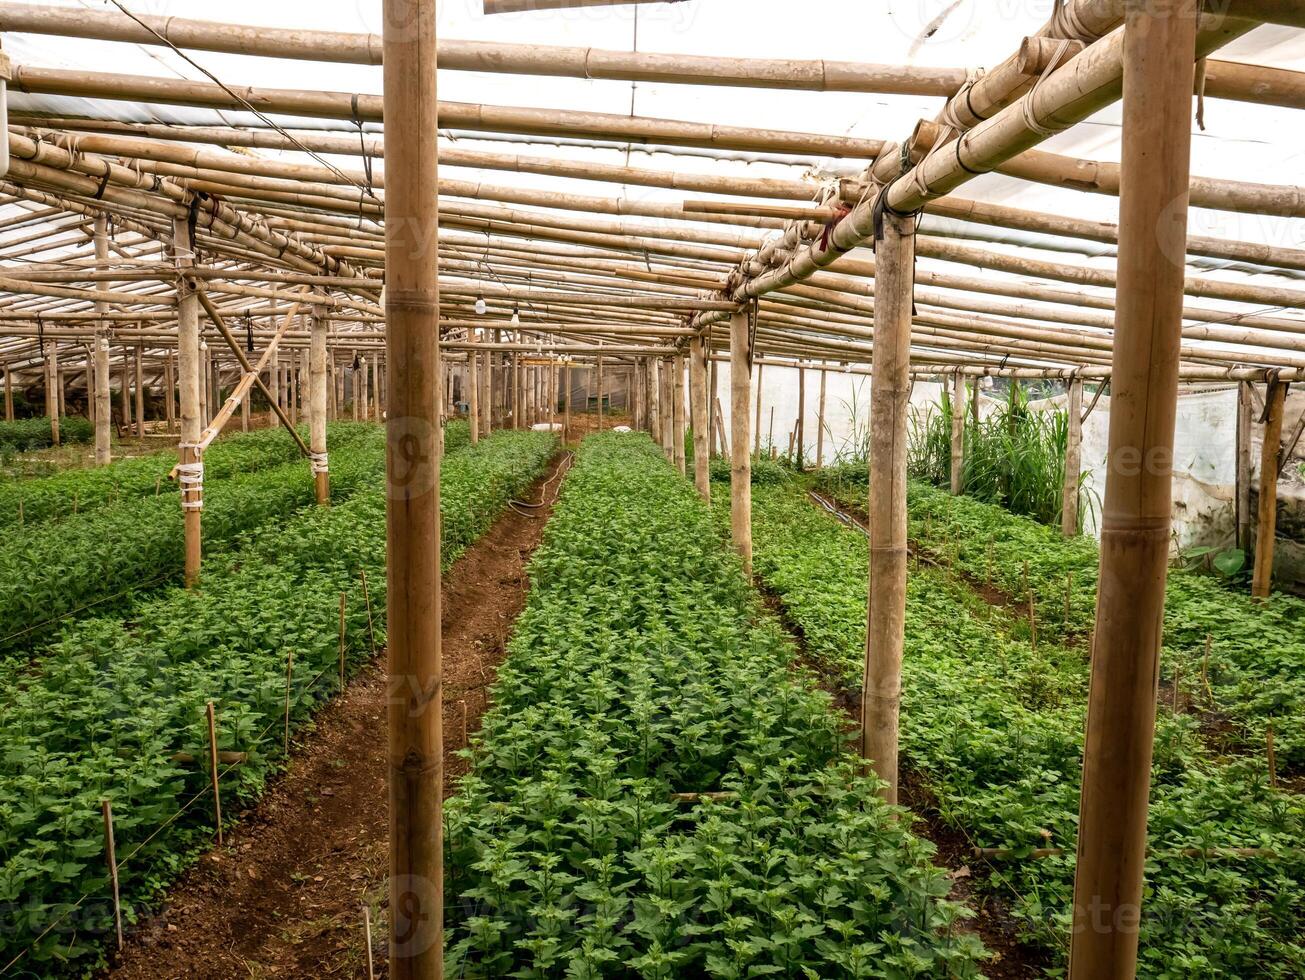 Chrysanthemums are grown in simple bamboo greenhouses photo